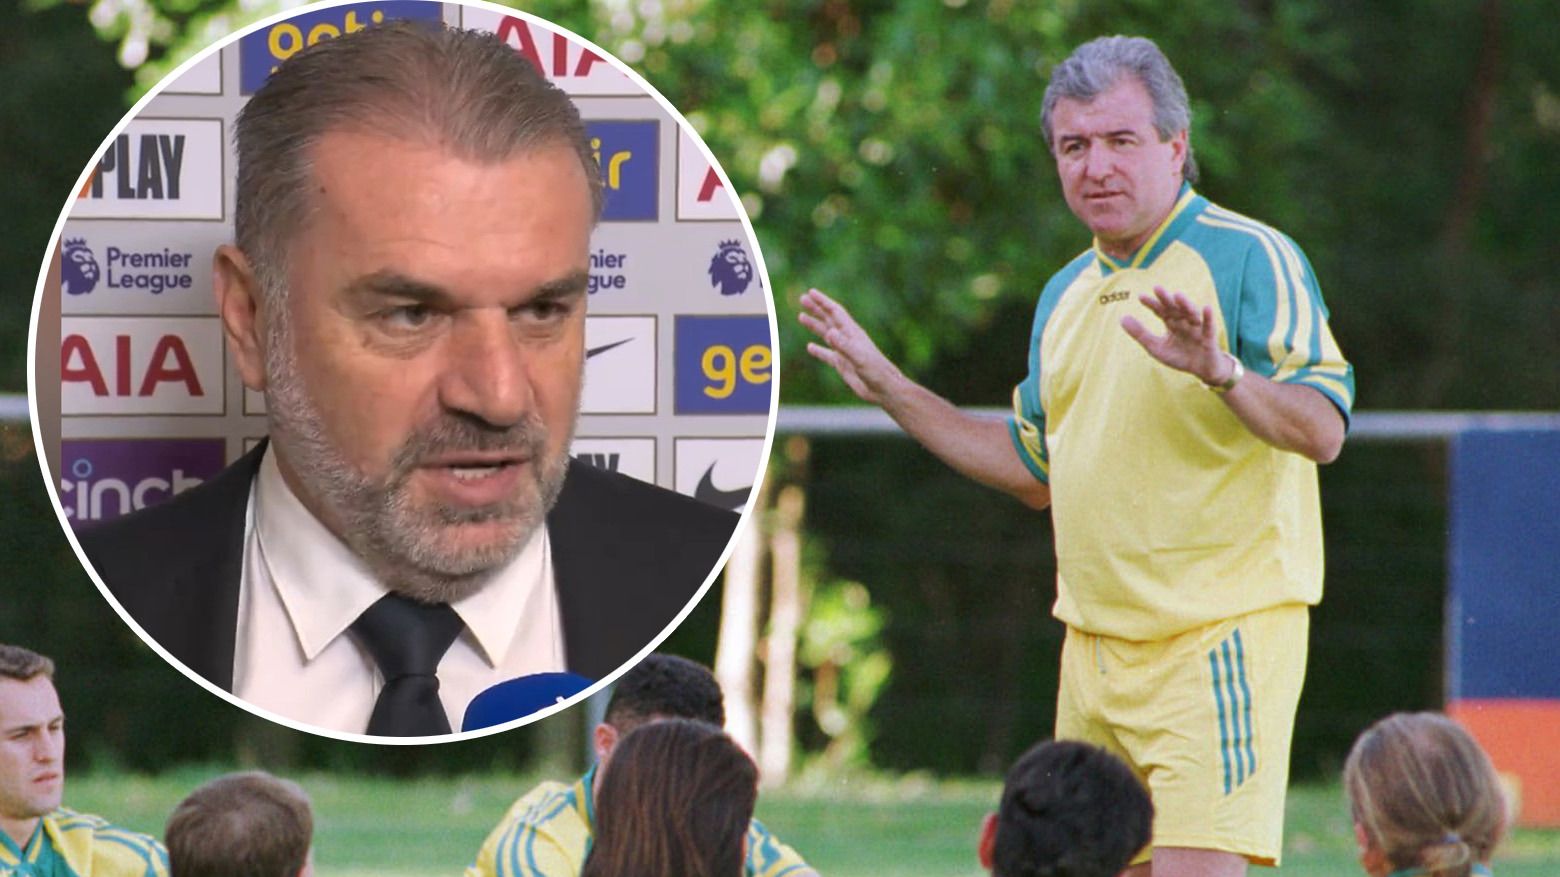 Ange Postecoglou paid tribute to former Socceroos coach Terry Venables.